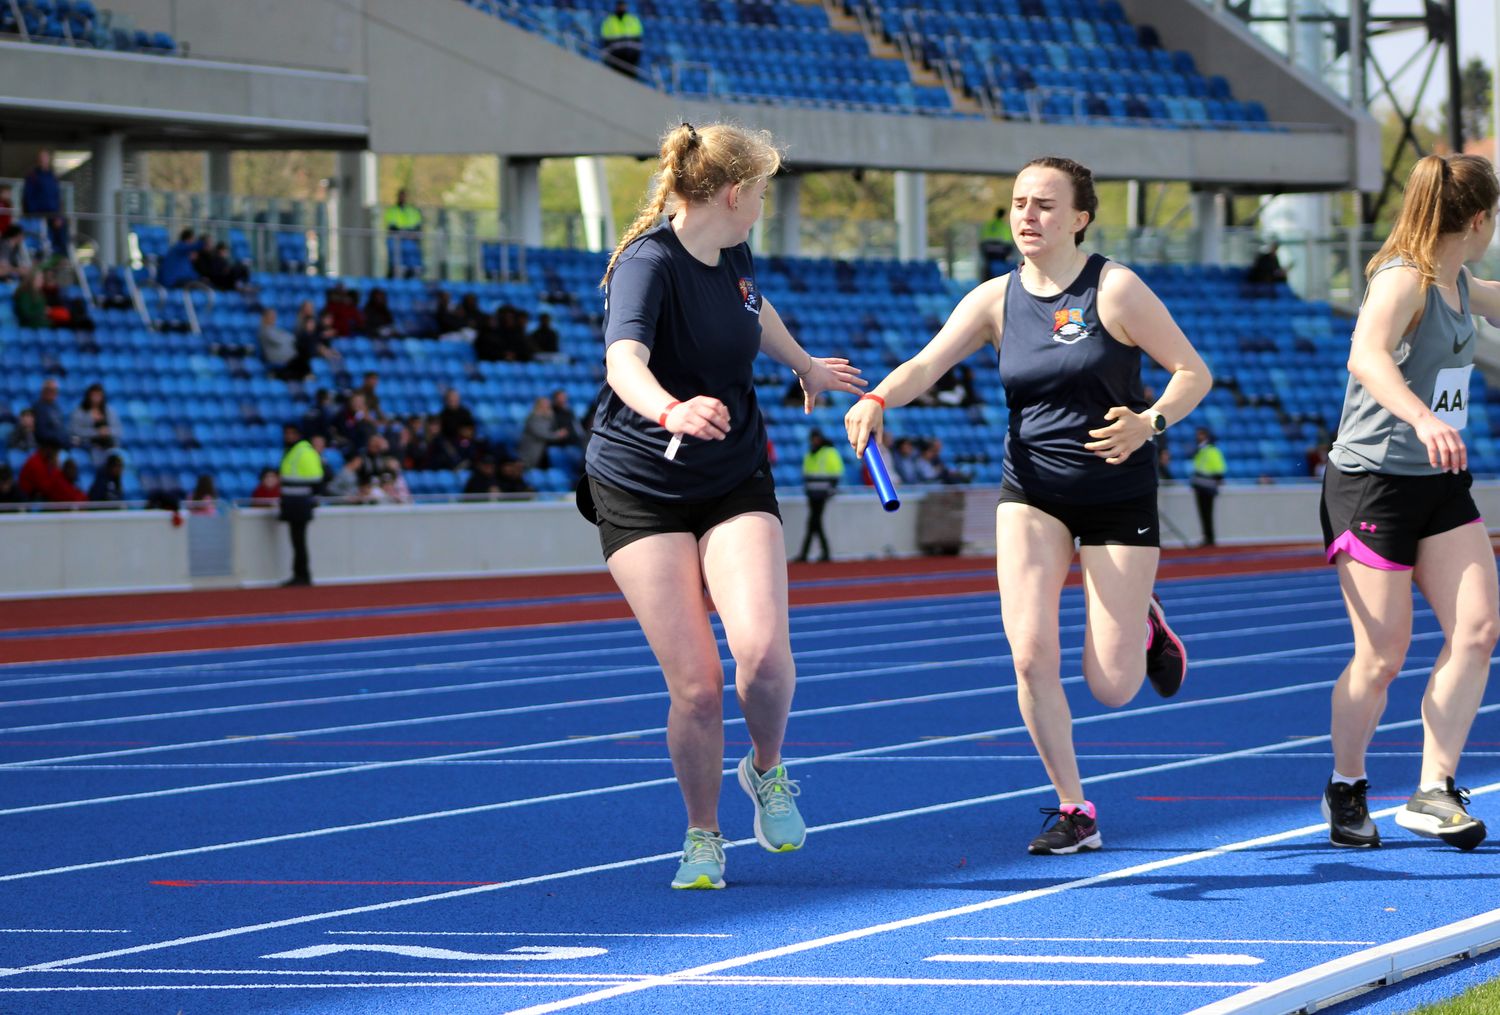 Two team members from BUOTC pass the relay baton to each other mid-race at the Midlands Army Athletics Championships